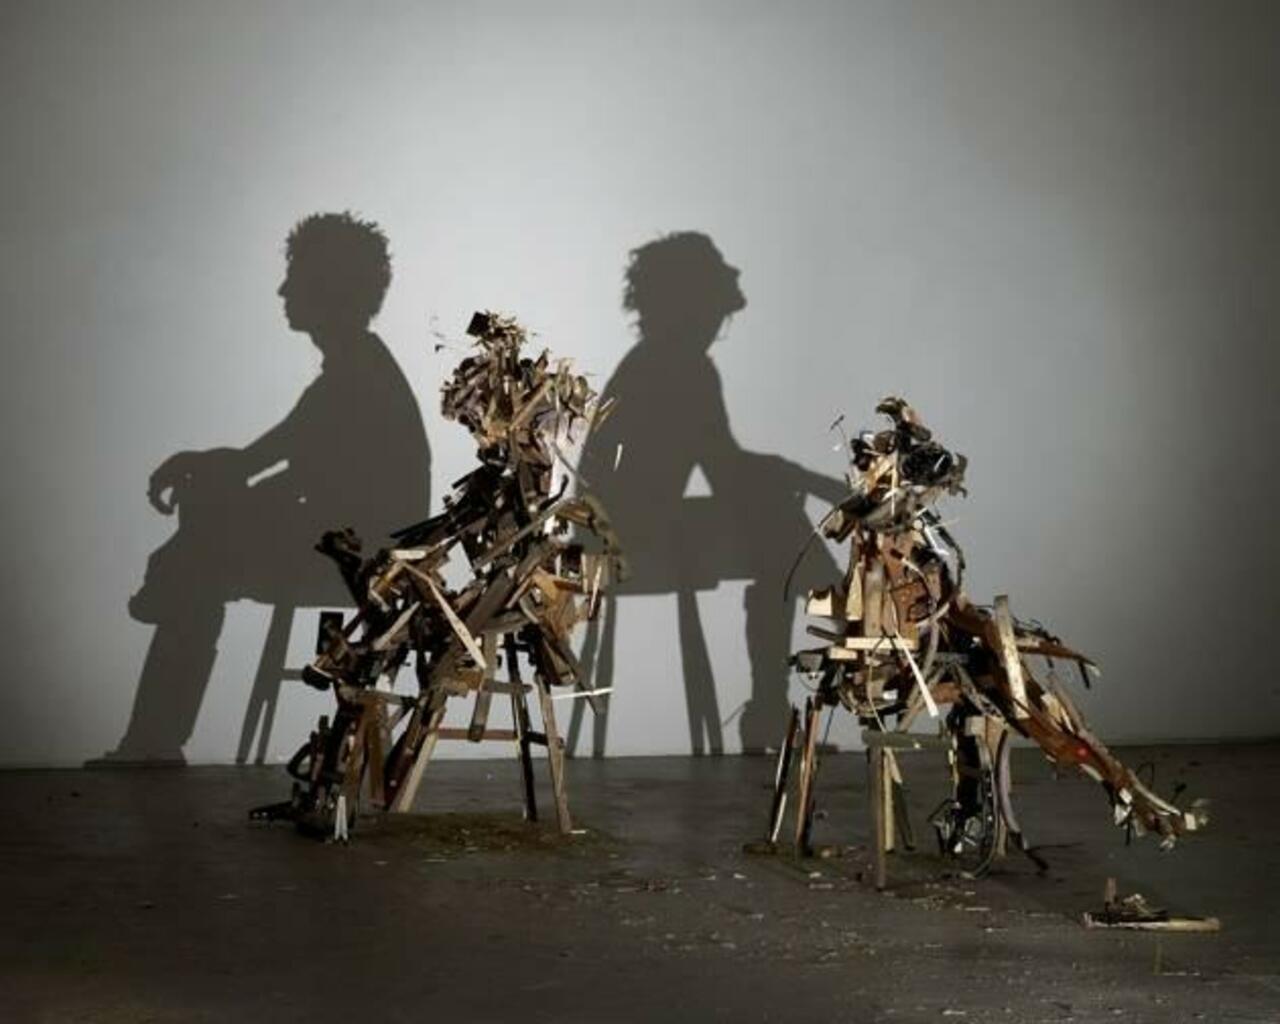 Wildly imaginative shadow play in these installations by Tim Noble & Sue Webster http://buff.ly/1yjTsyZ  #art http://t.co/hACmcDafCM